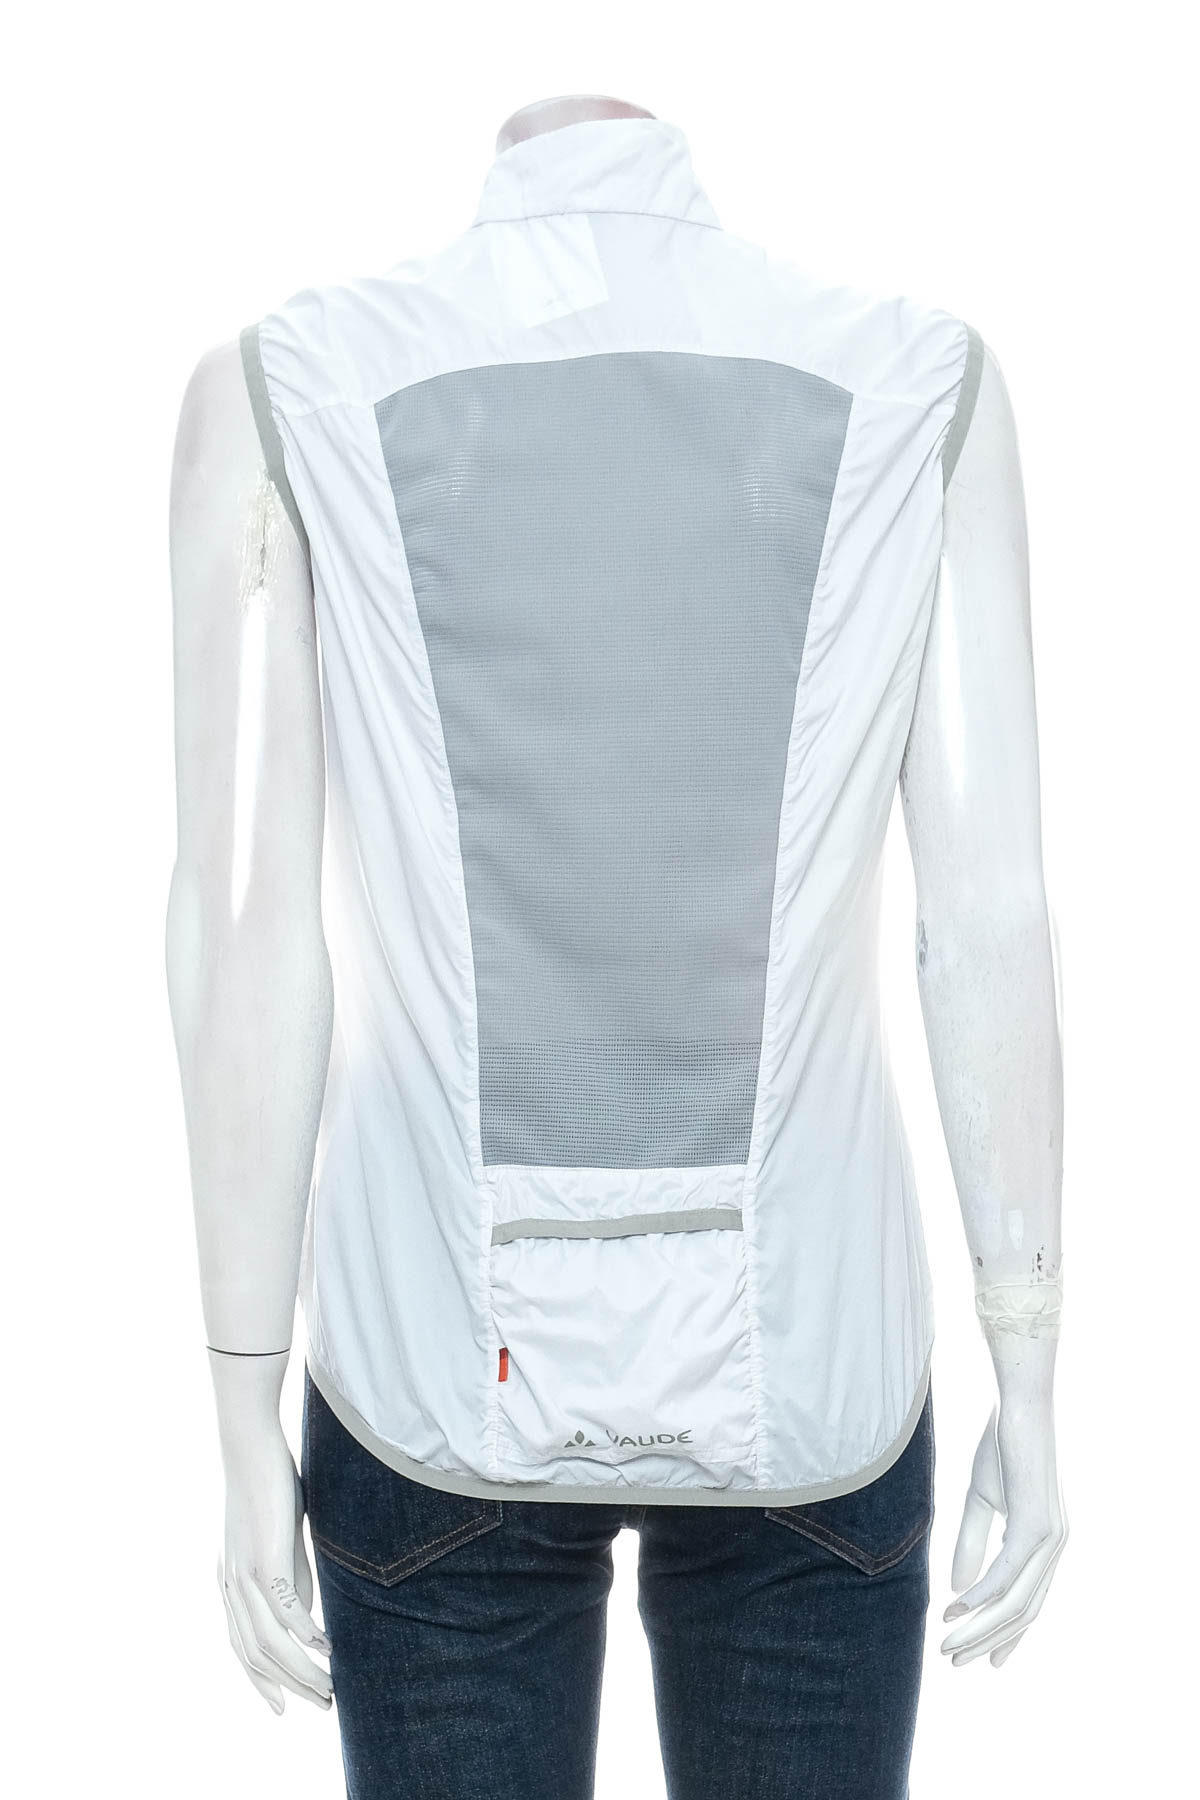 Women's vest for cycling - 1